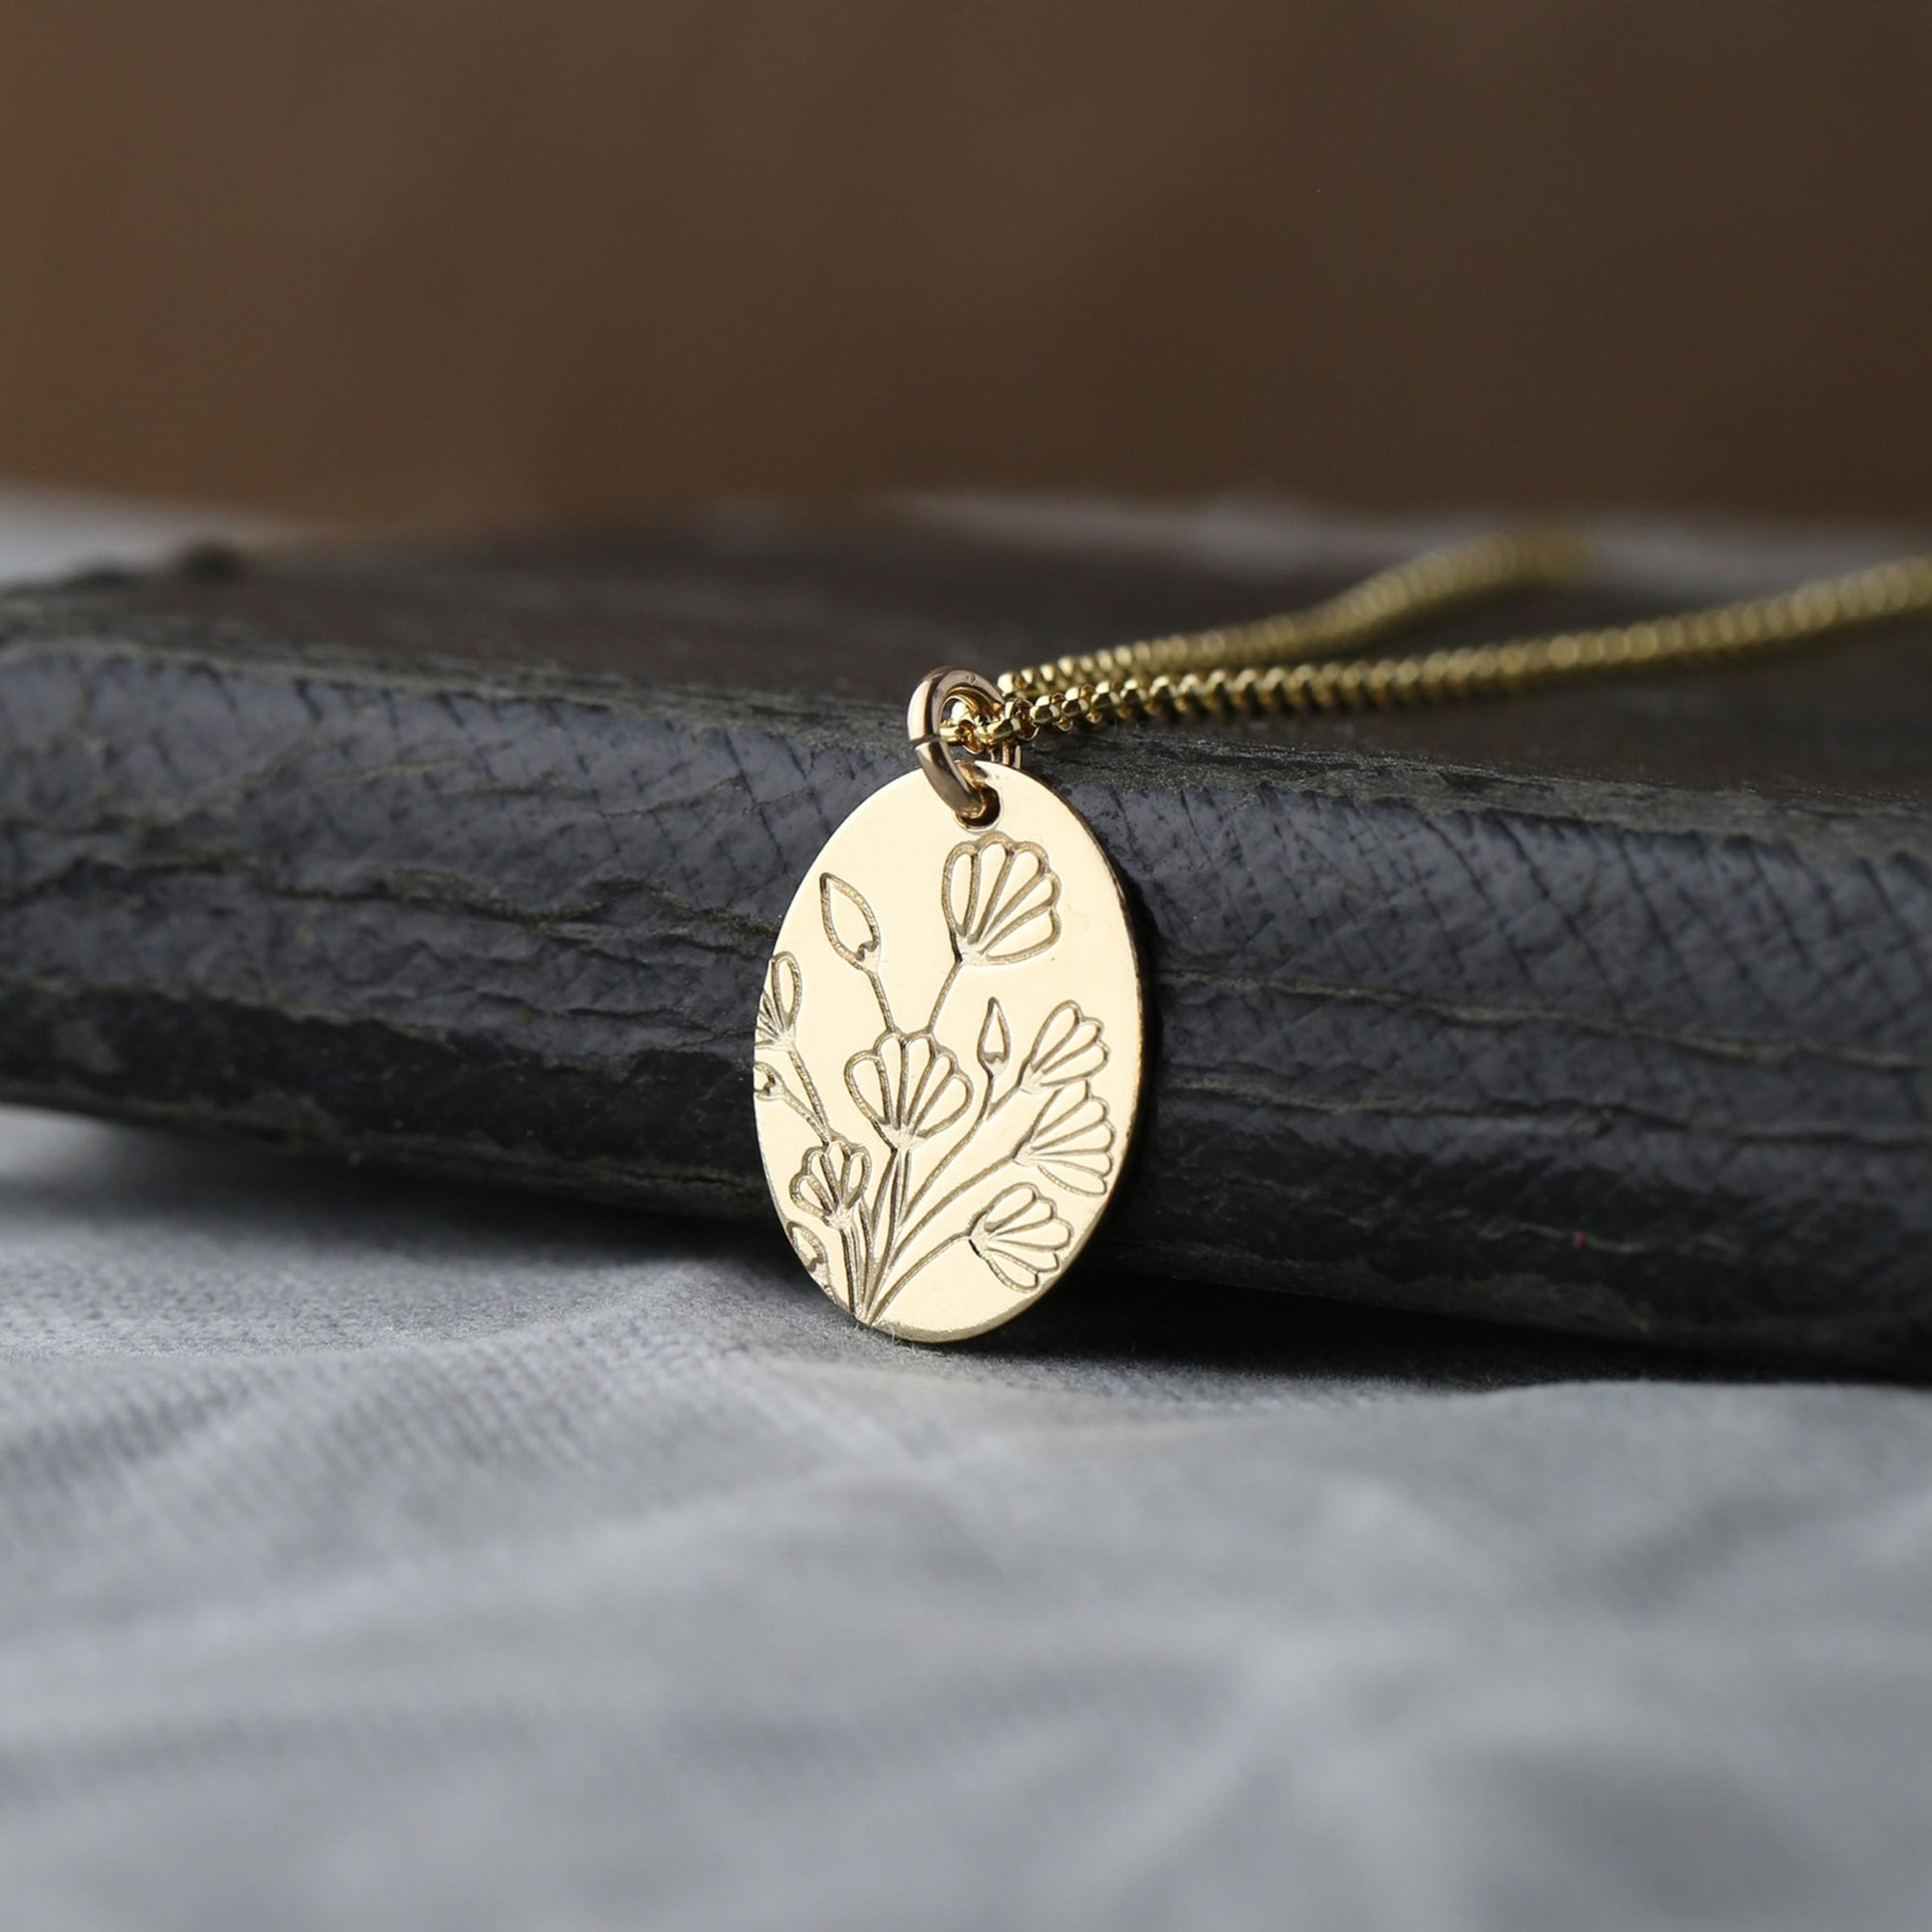 Hand Stamped Floral Oval Necklace handmade by Burnish